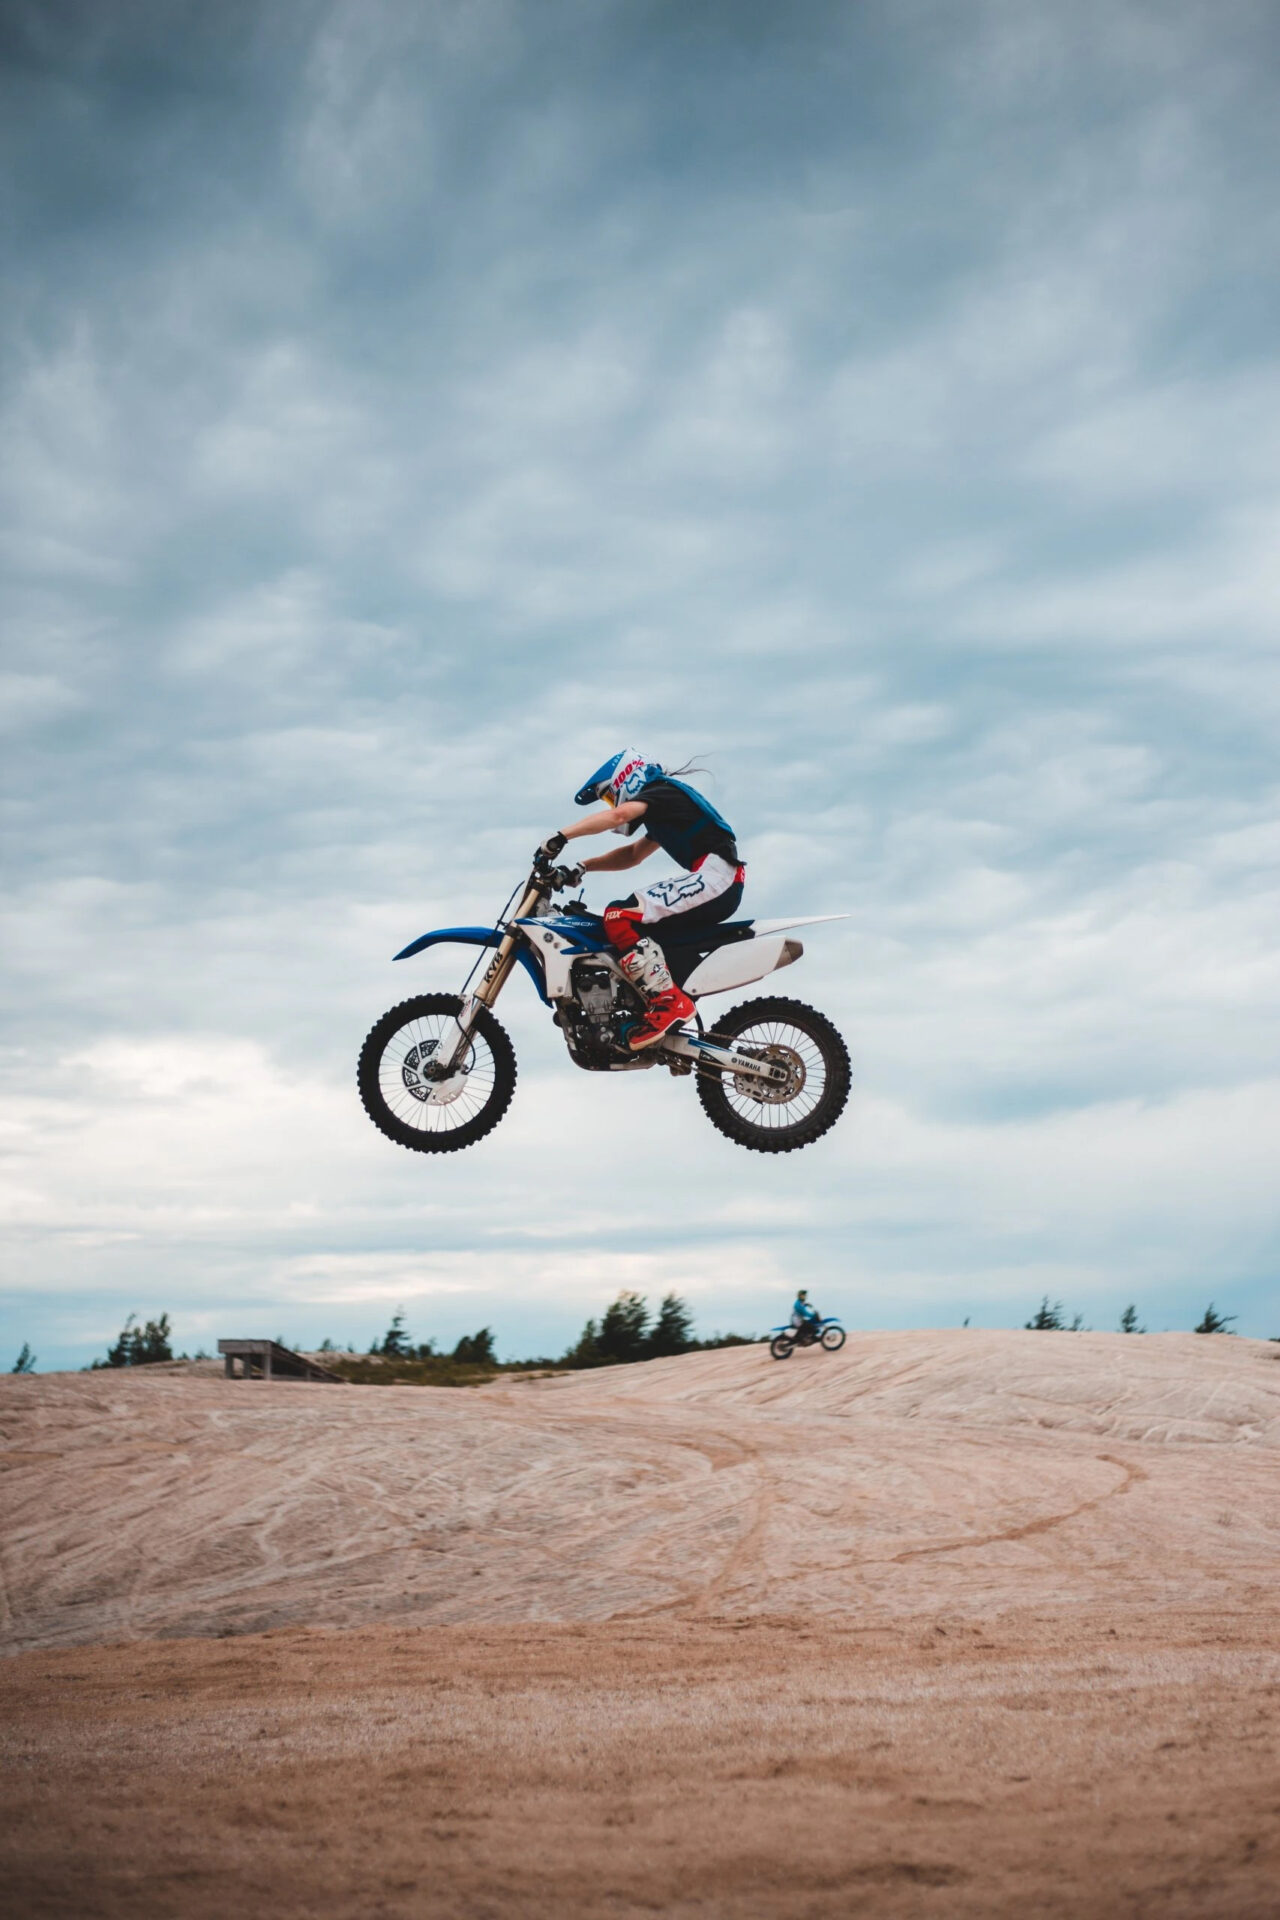 Wallpaper ID 1391709  nature one person man real people sunset clear  sky transportation system men road riding dirt bike outdoors biker  ride person leisure activity free download